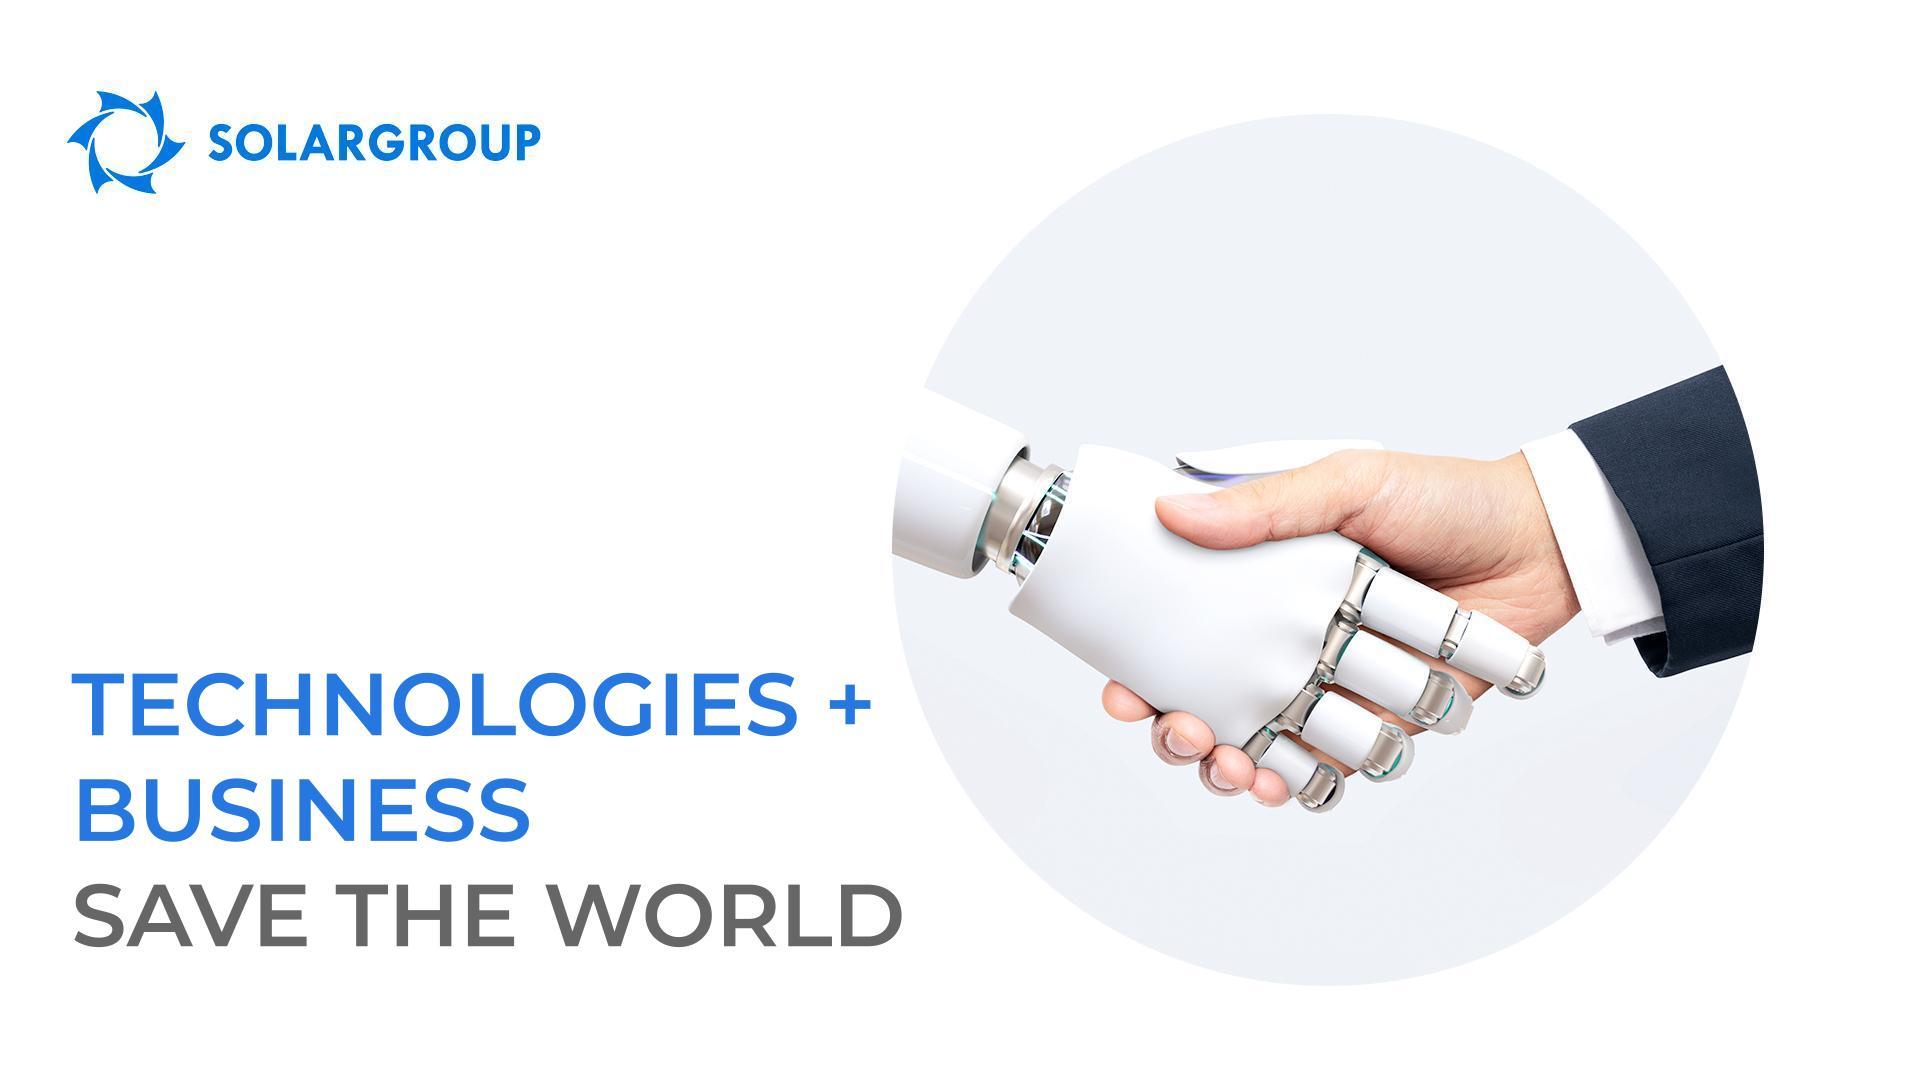 Technologies + business save the world